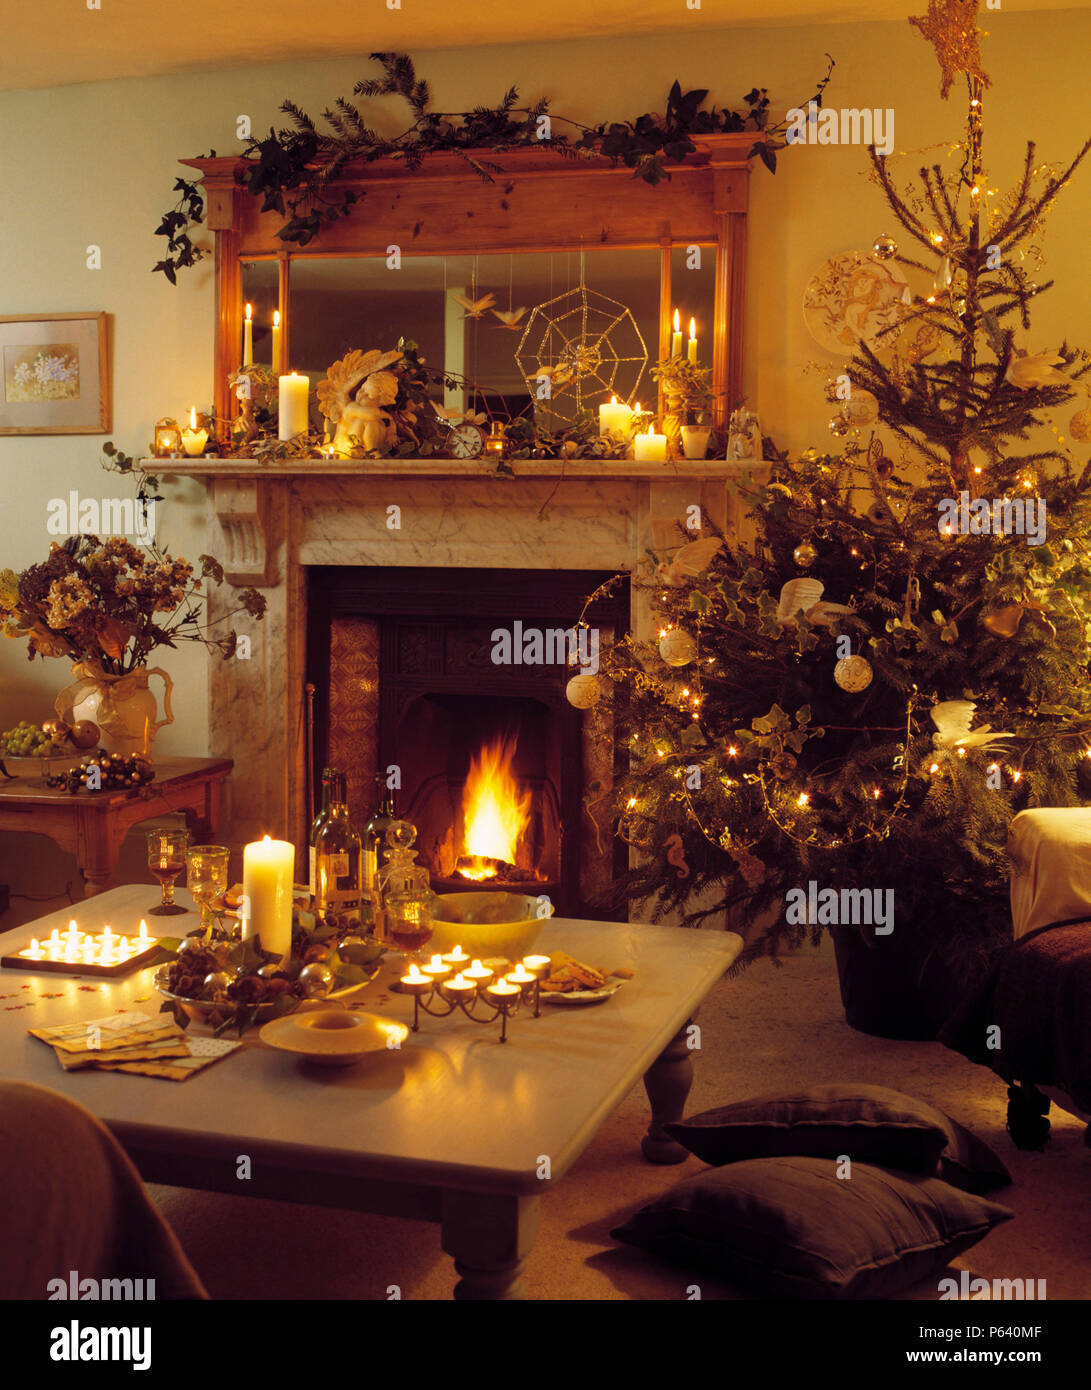 Country sitting room lit by candles and decorated for Christmas with tree  by fireplace with lighted fire Stock Photo - Alamy